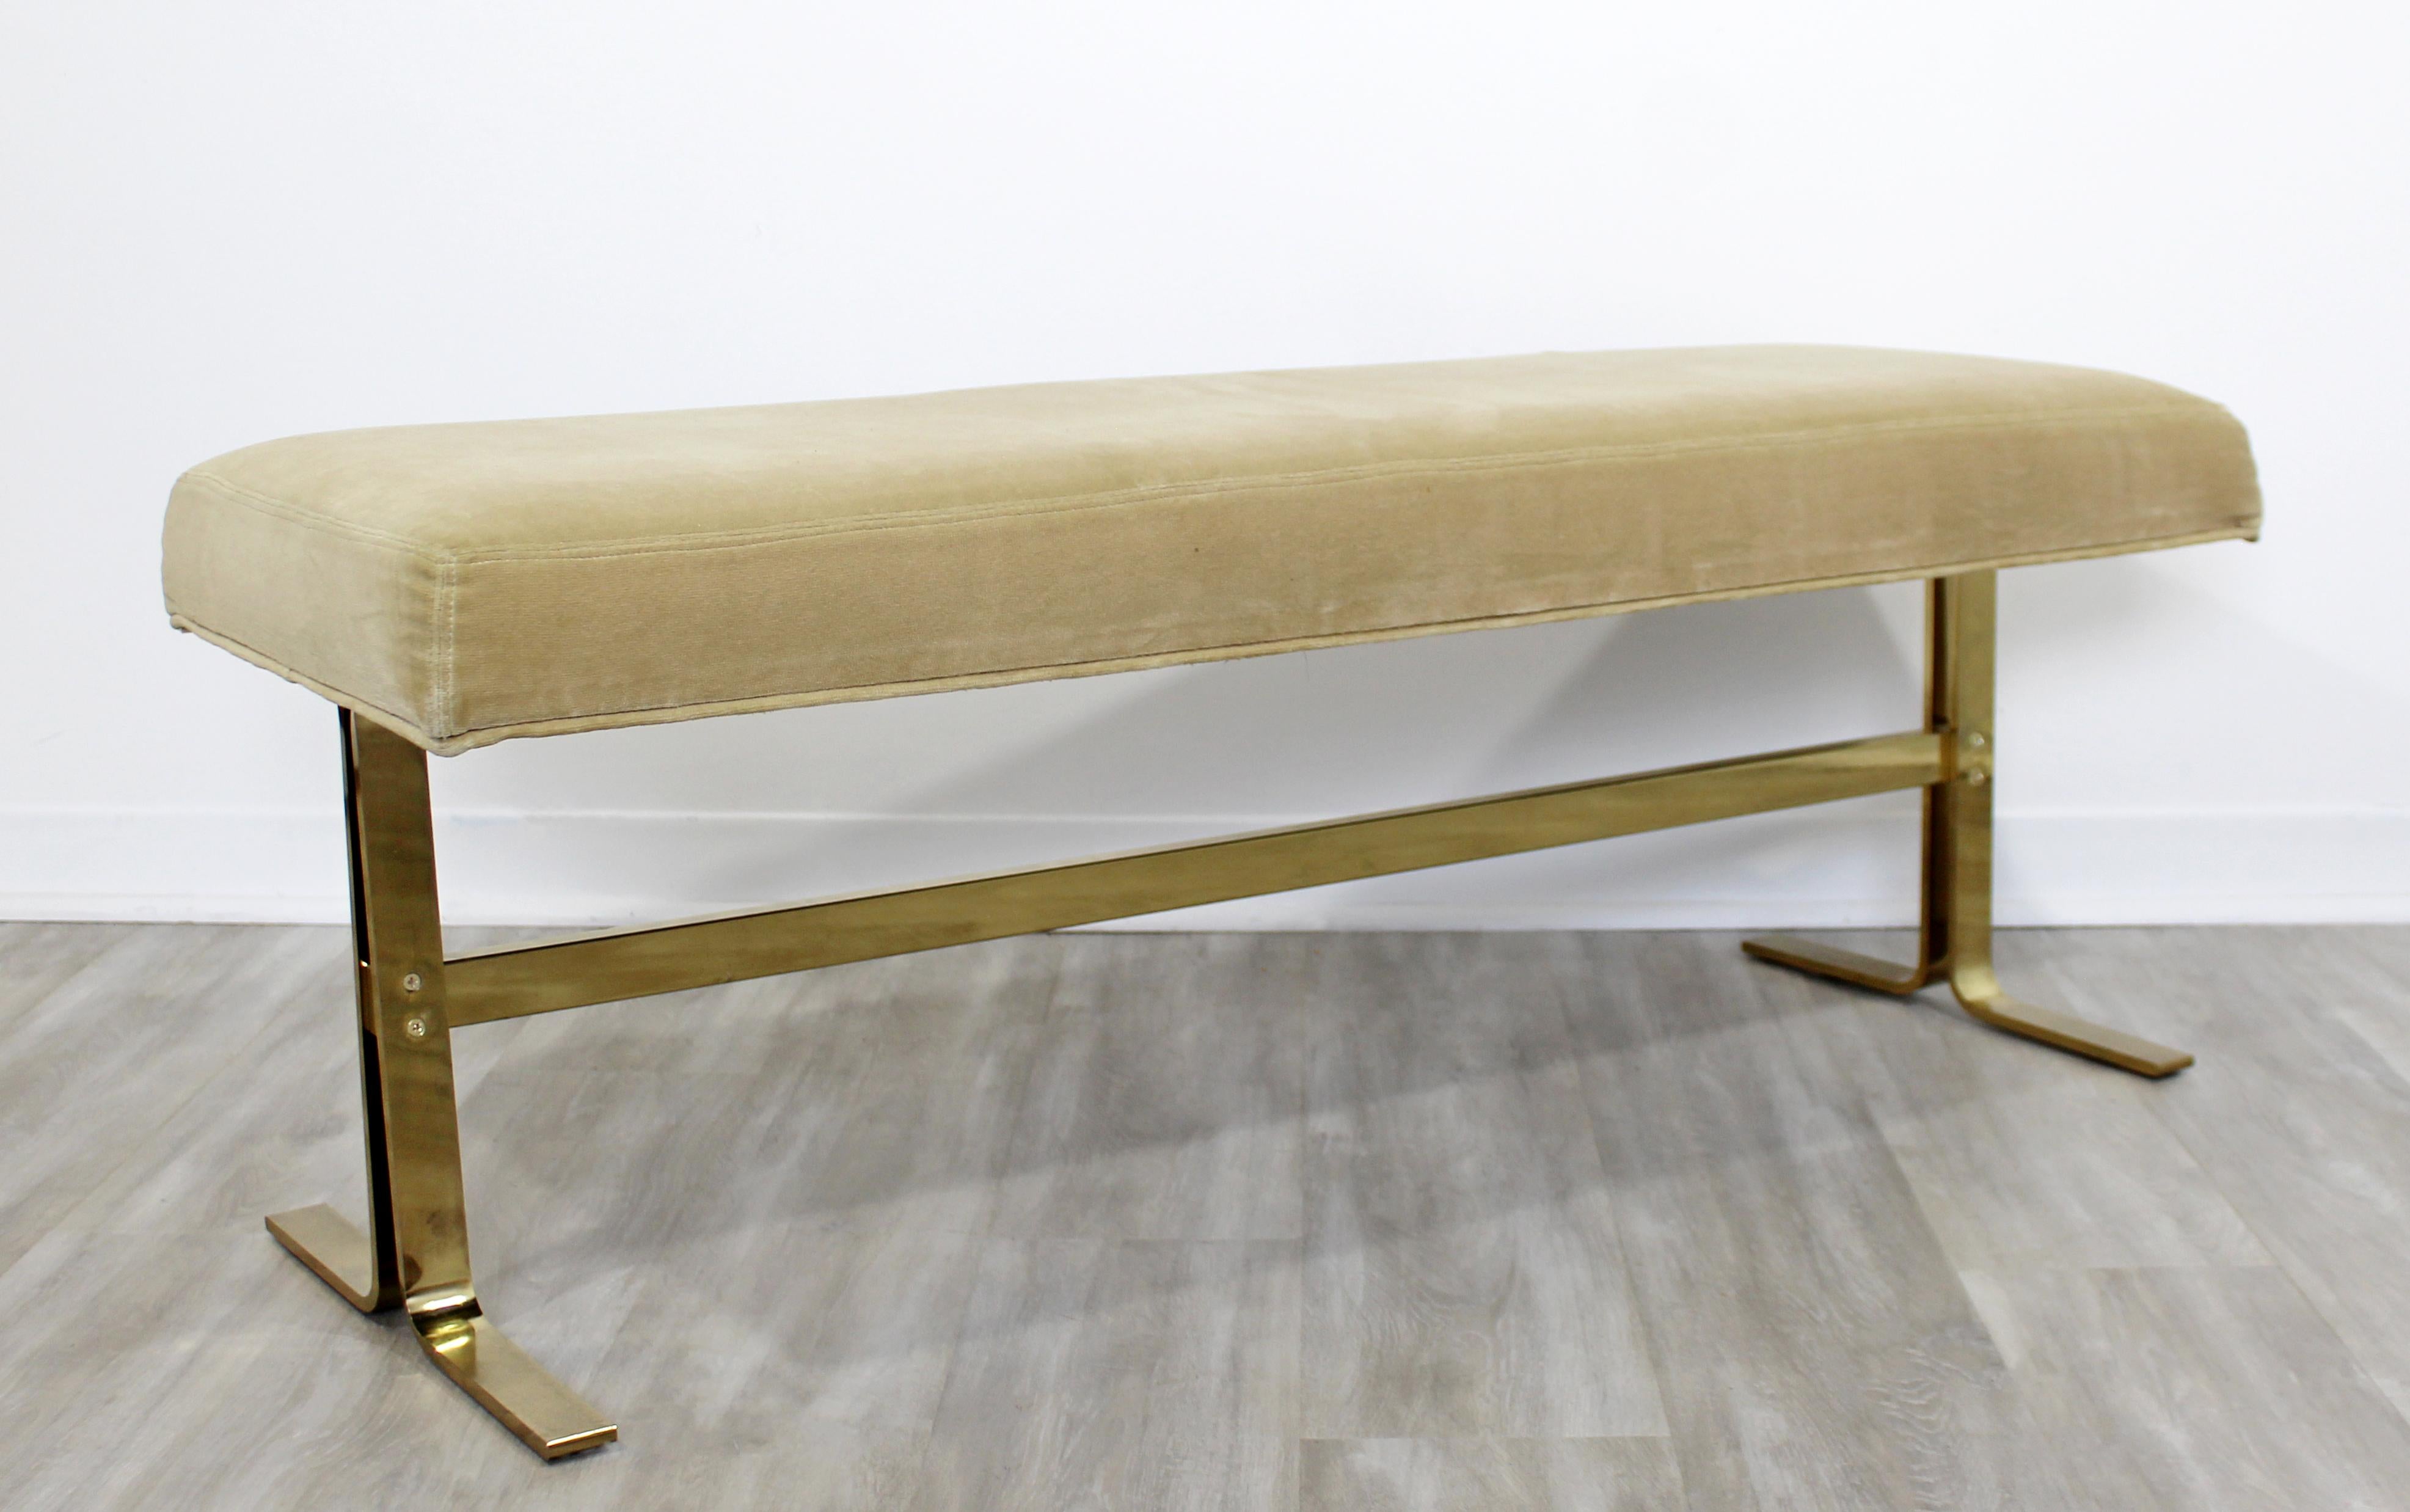 American Mid-Century Modern Brass Bench Seat for DIA, 1970s